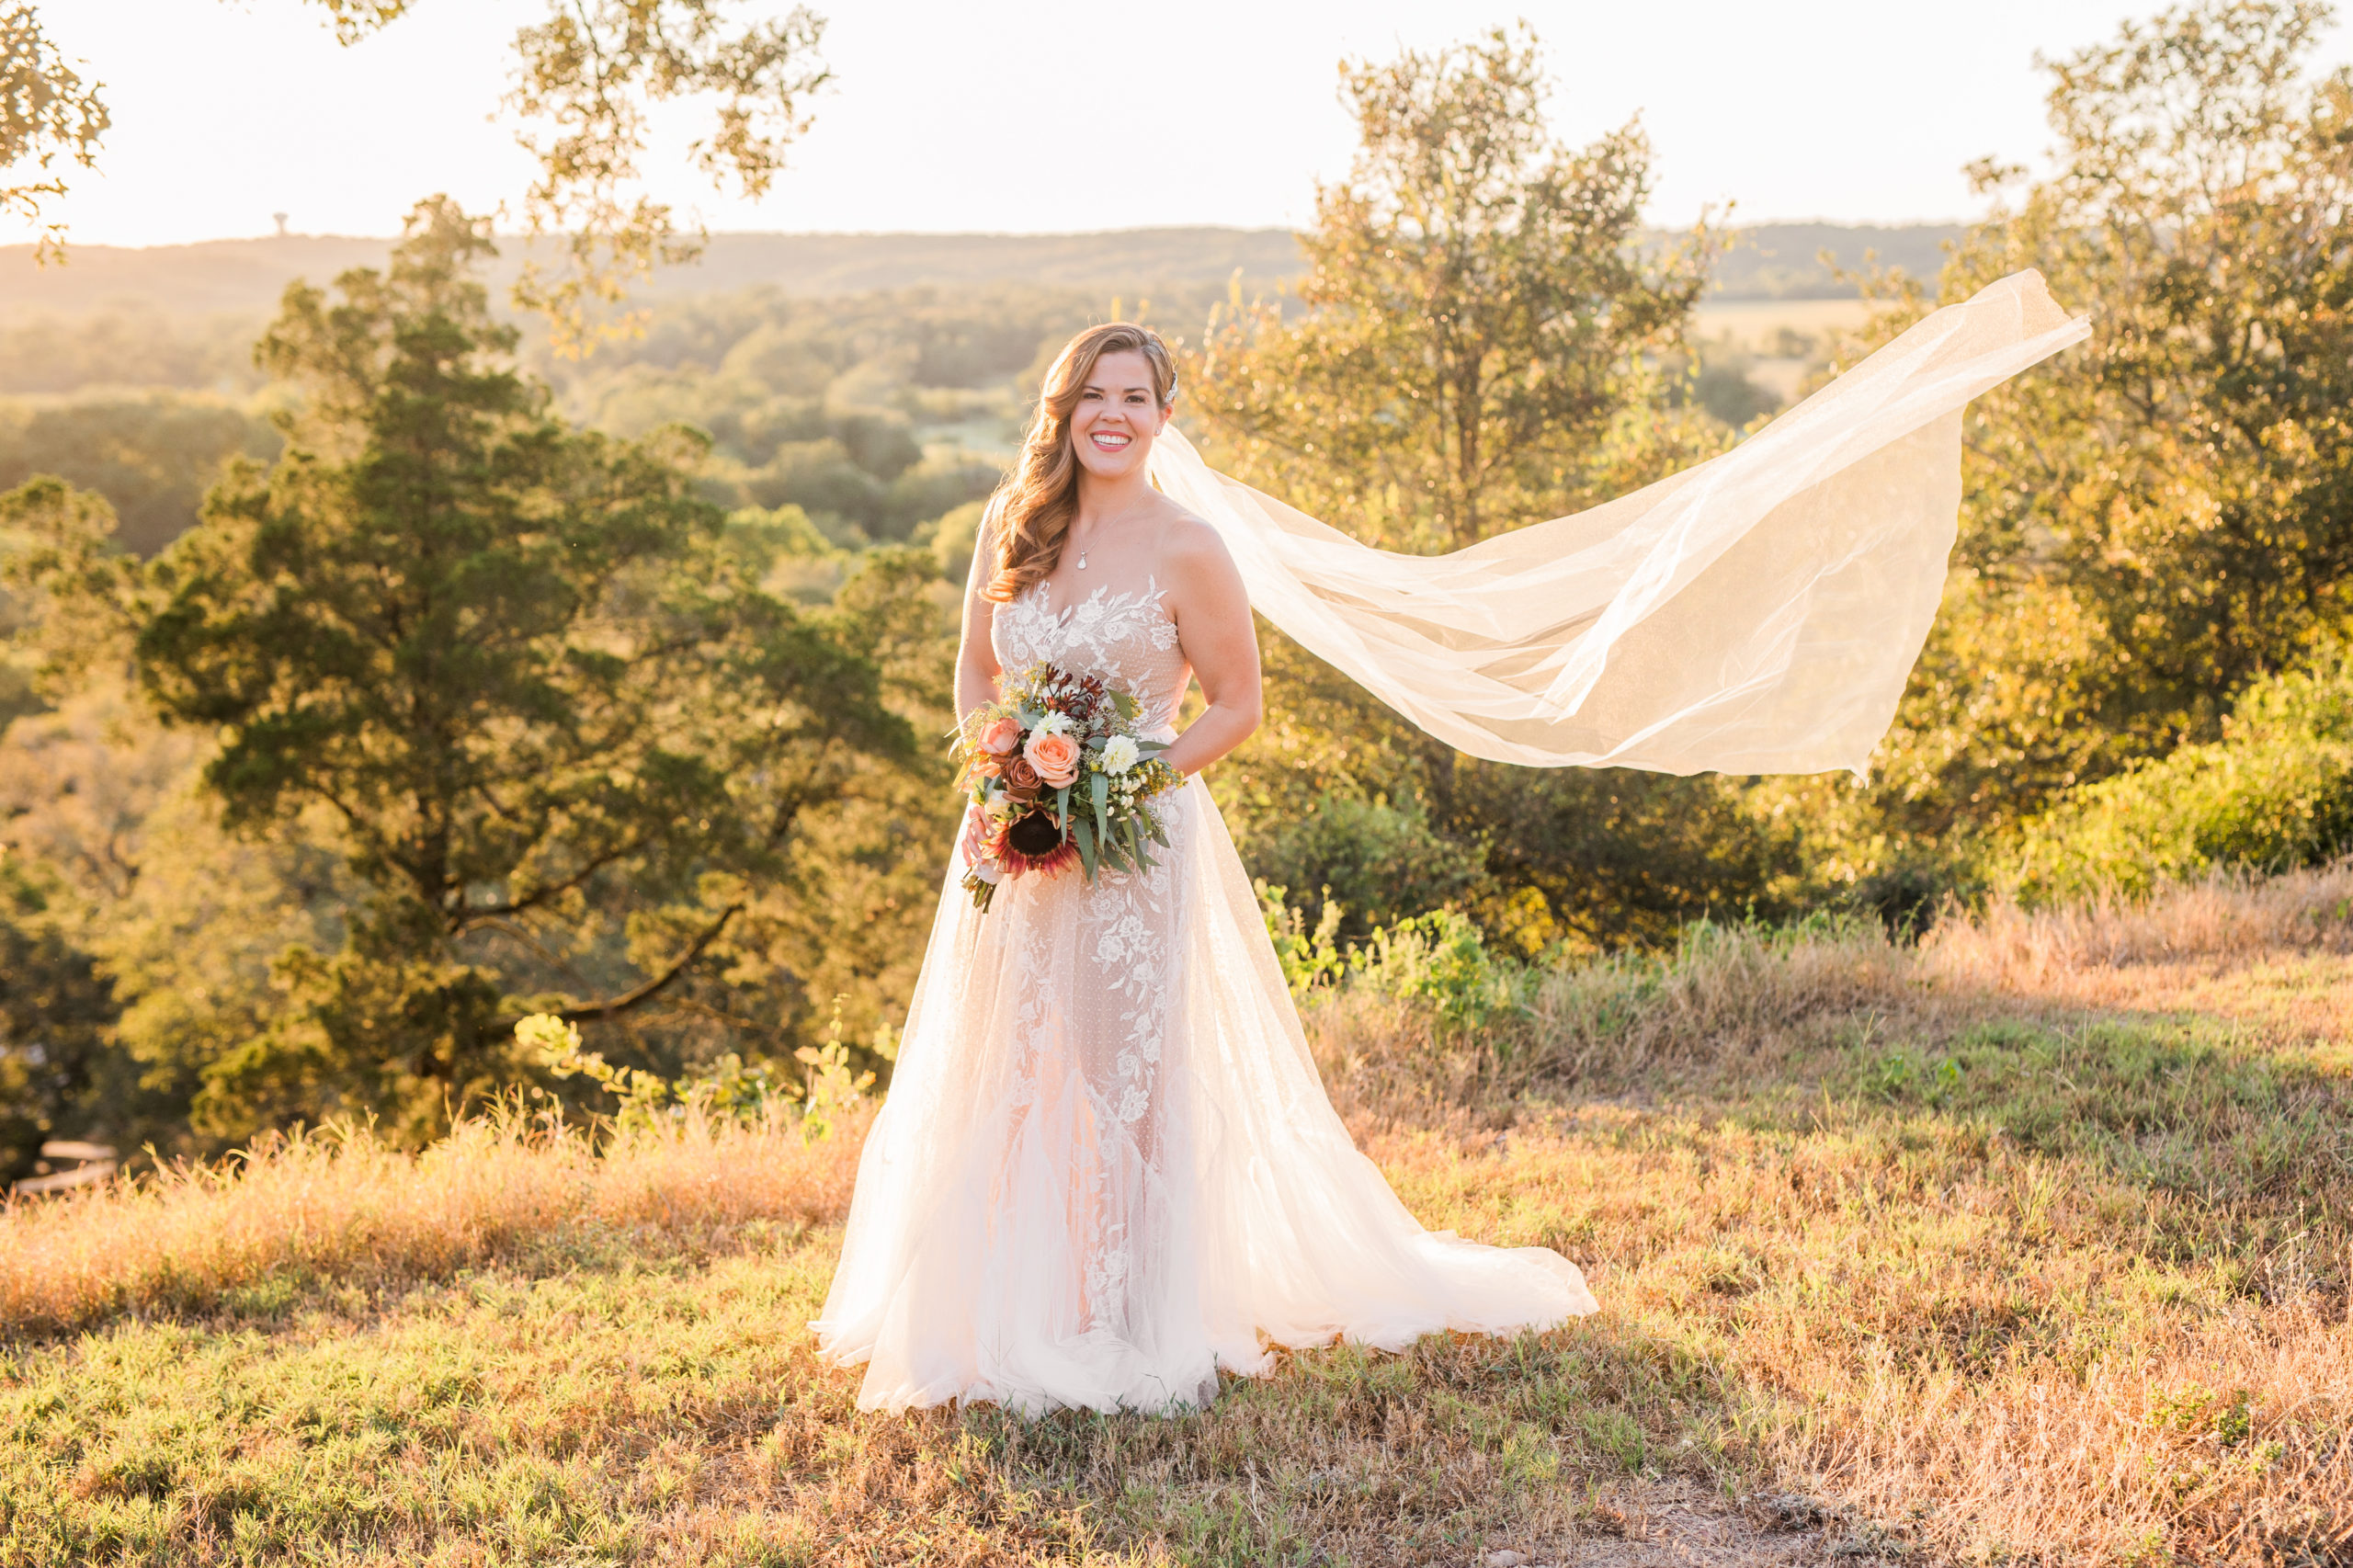 Bridal Portraits: Why They're Worth it